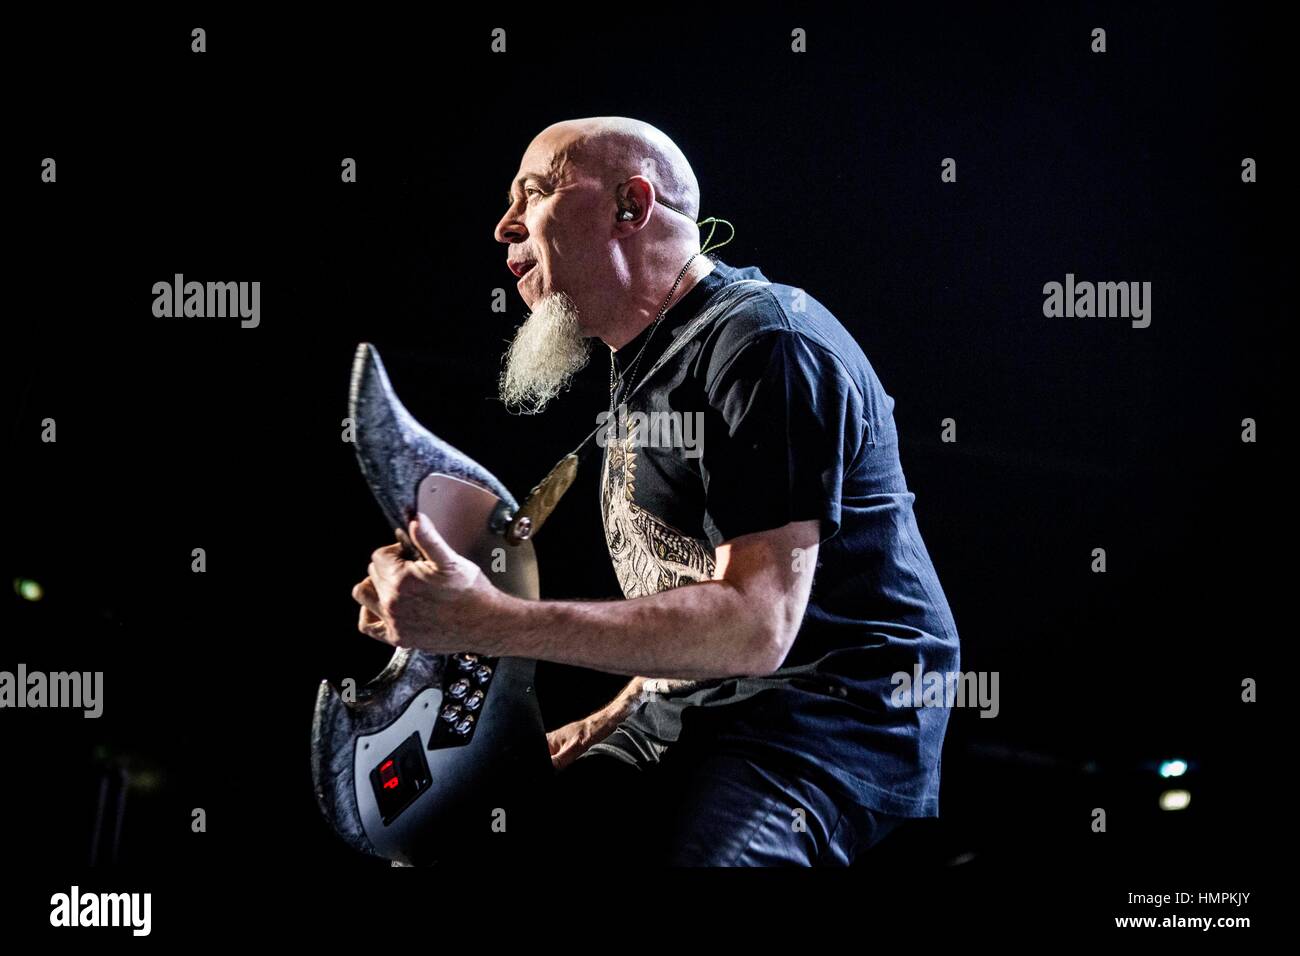 Milan, Italy. 04th Feb, 2017. Jordan of the American progressive metal band Dream Theater pictured on stage as they perform at Mediolanum in Milan, Italy. Credit: Roberto Press/Alamy Live